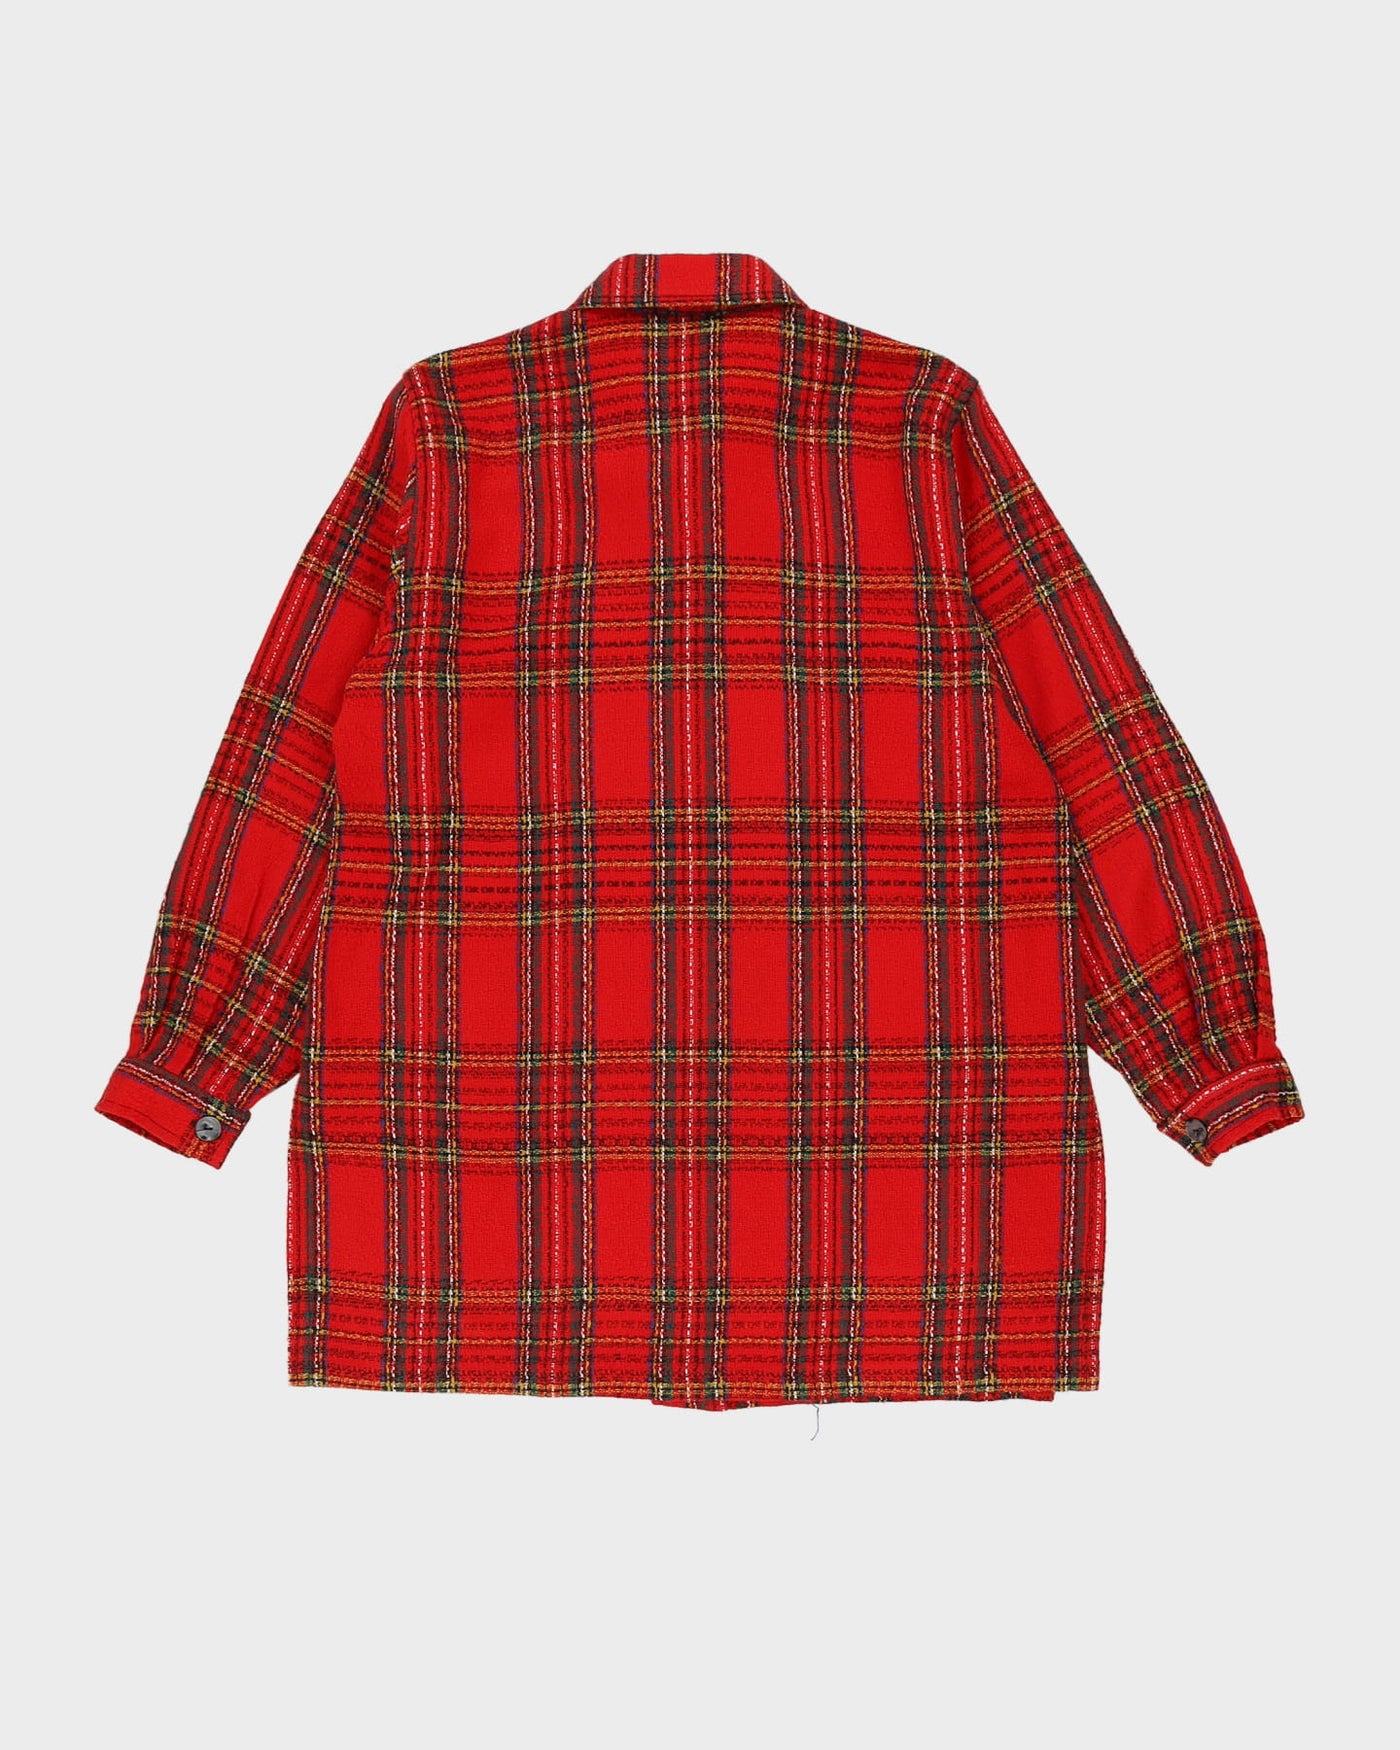 Vintage 80s Red Check Flannel Shirt - XL